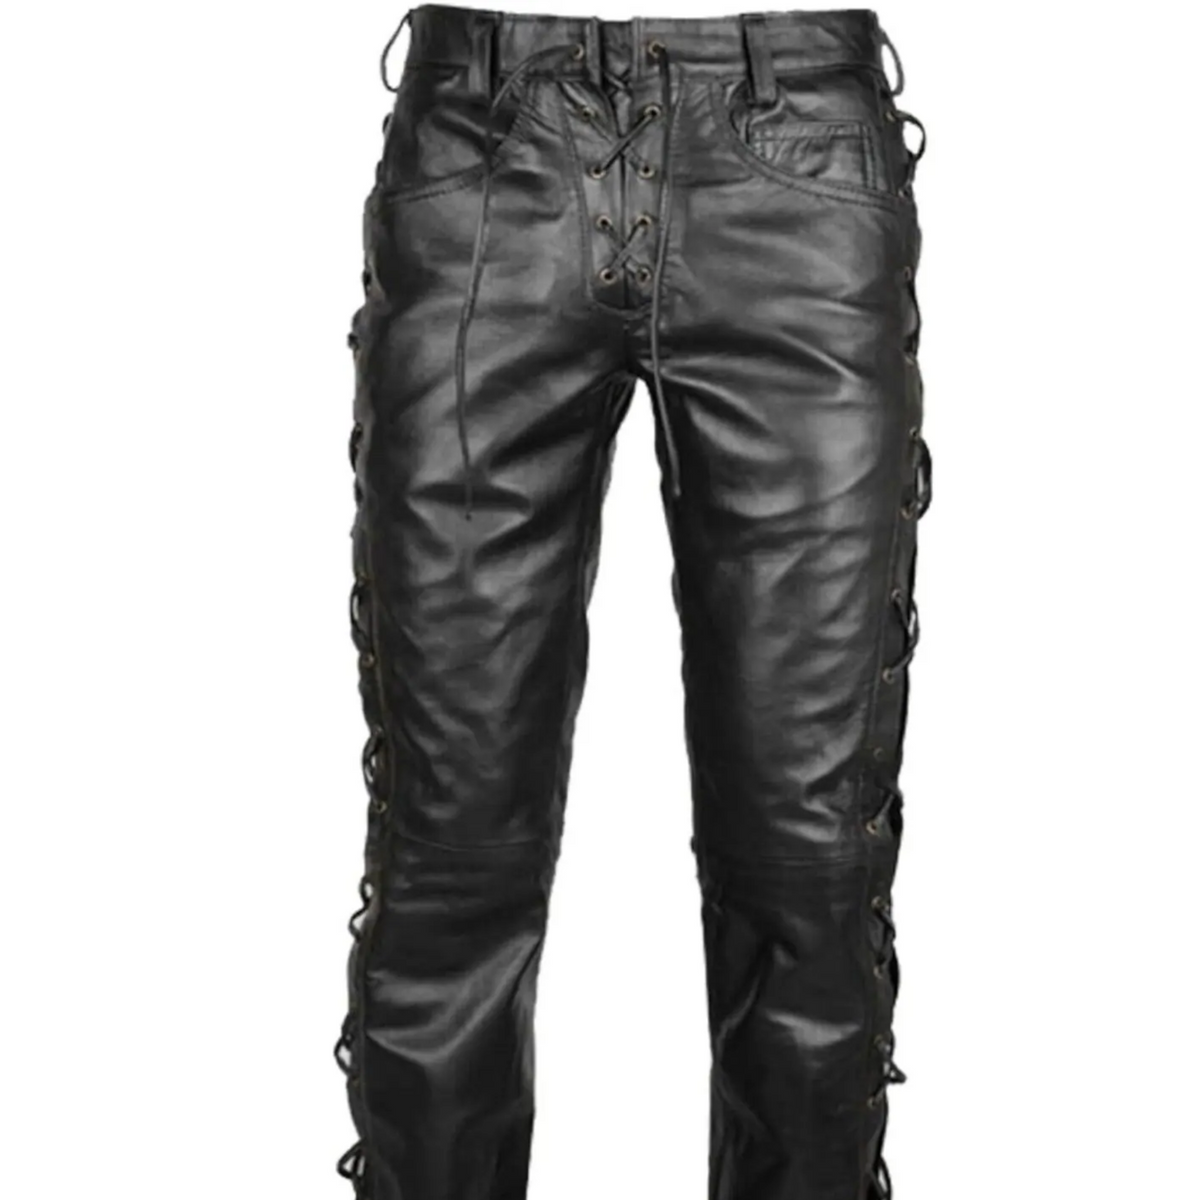 Genuine Black Leather Biker Pants, Side and Front Laces Up Bikers Jeans,  Motorcycle Leather Trousers, New Lace up Style, Gift for Riders Gift for